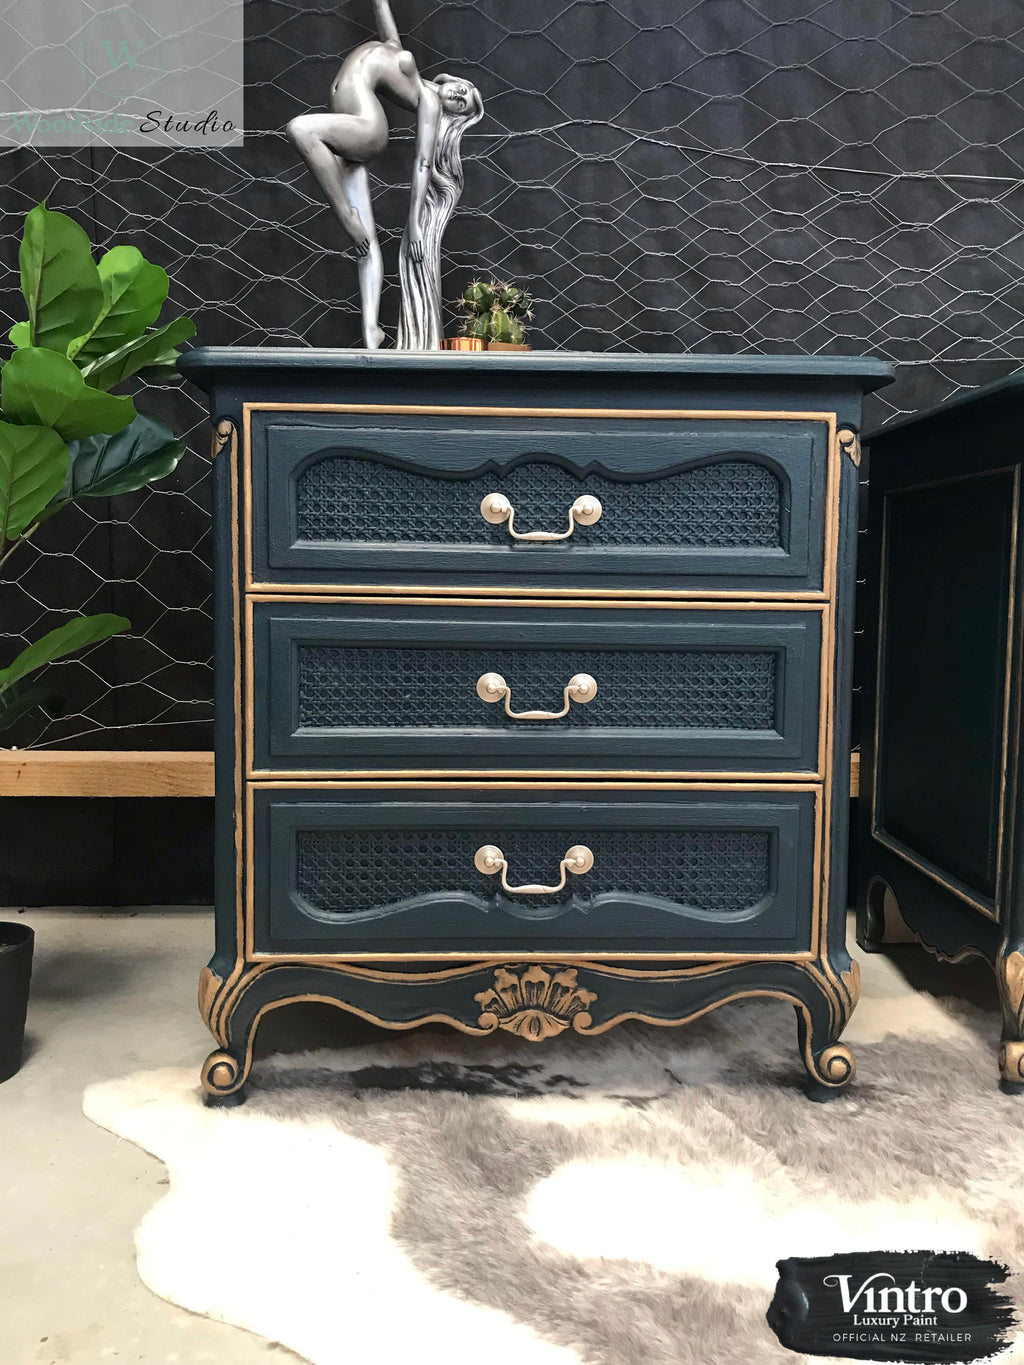 French Bedside Tables